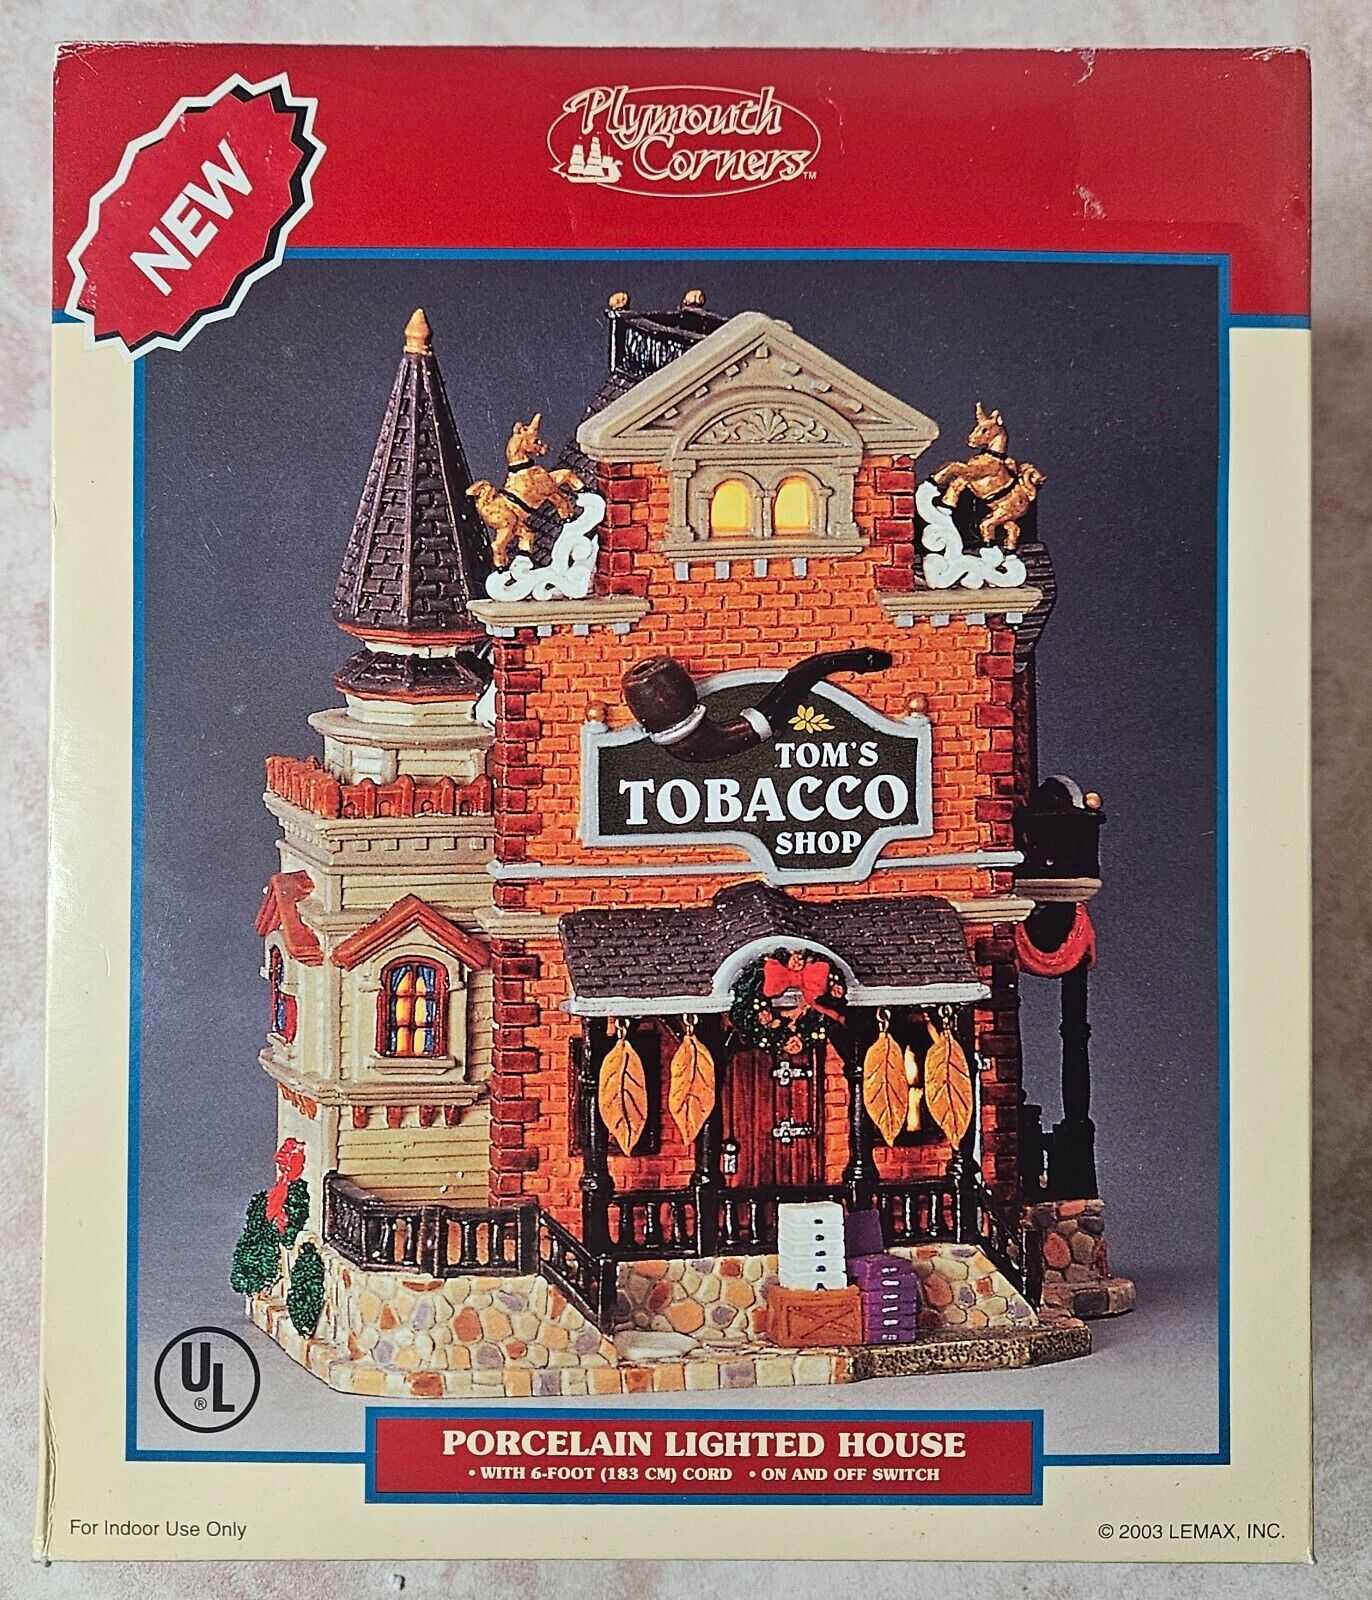 Lemax Plymouth Corners Tom's Tobacco Shop and Cigar Store RARE Christmas Village